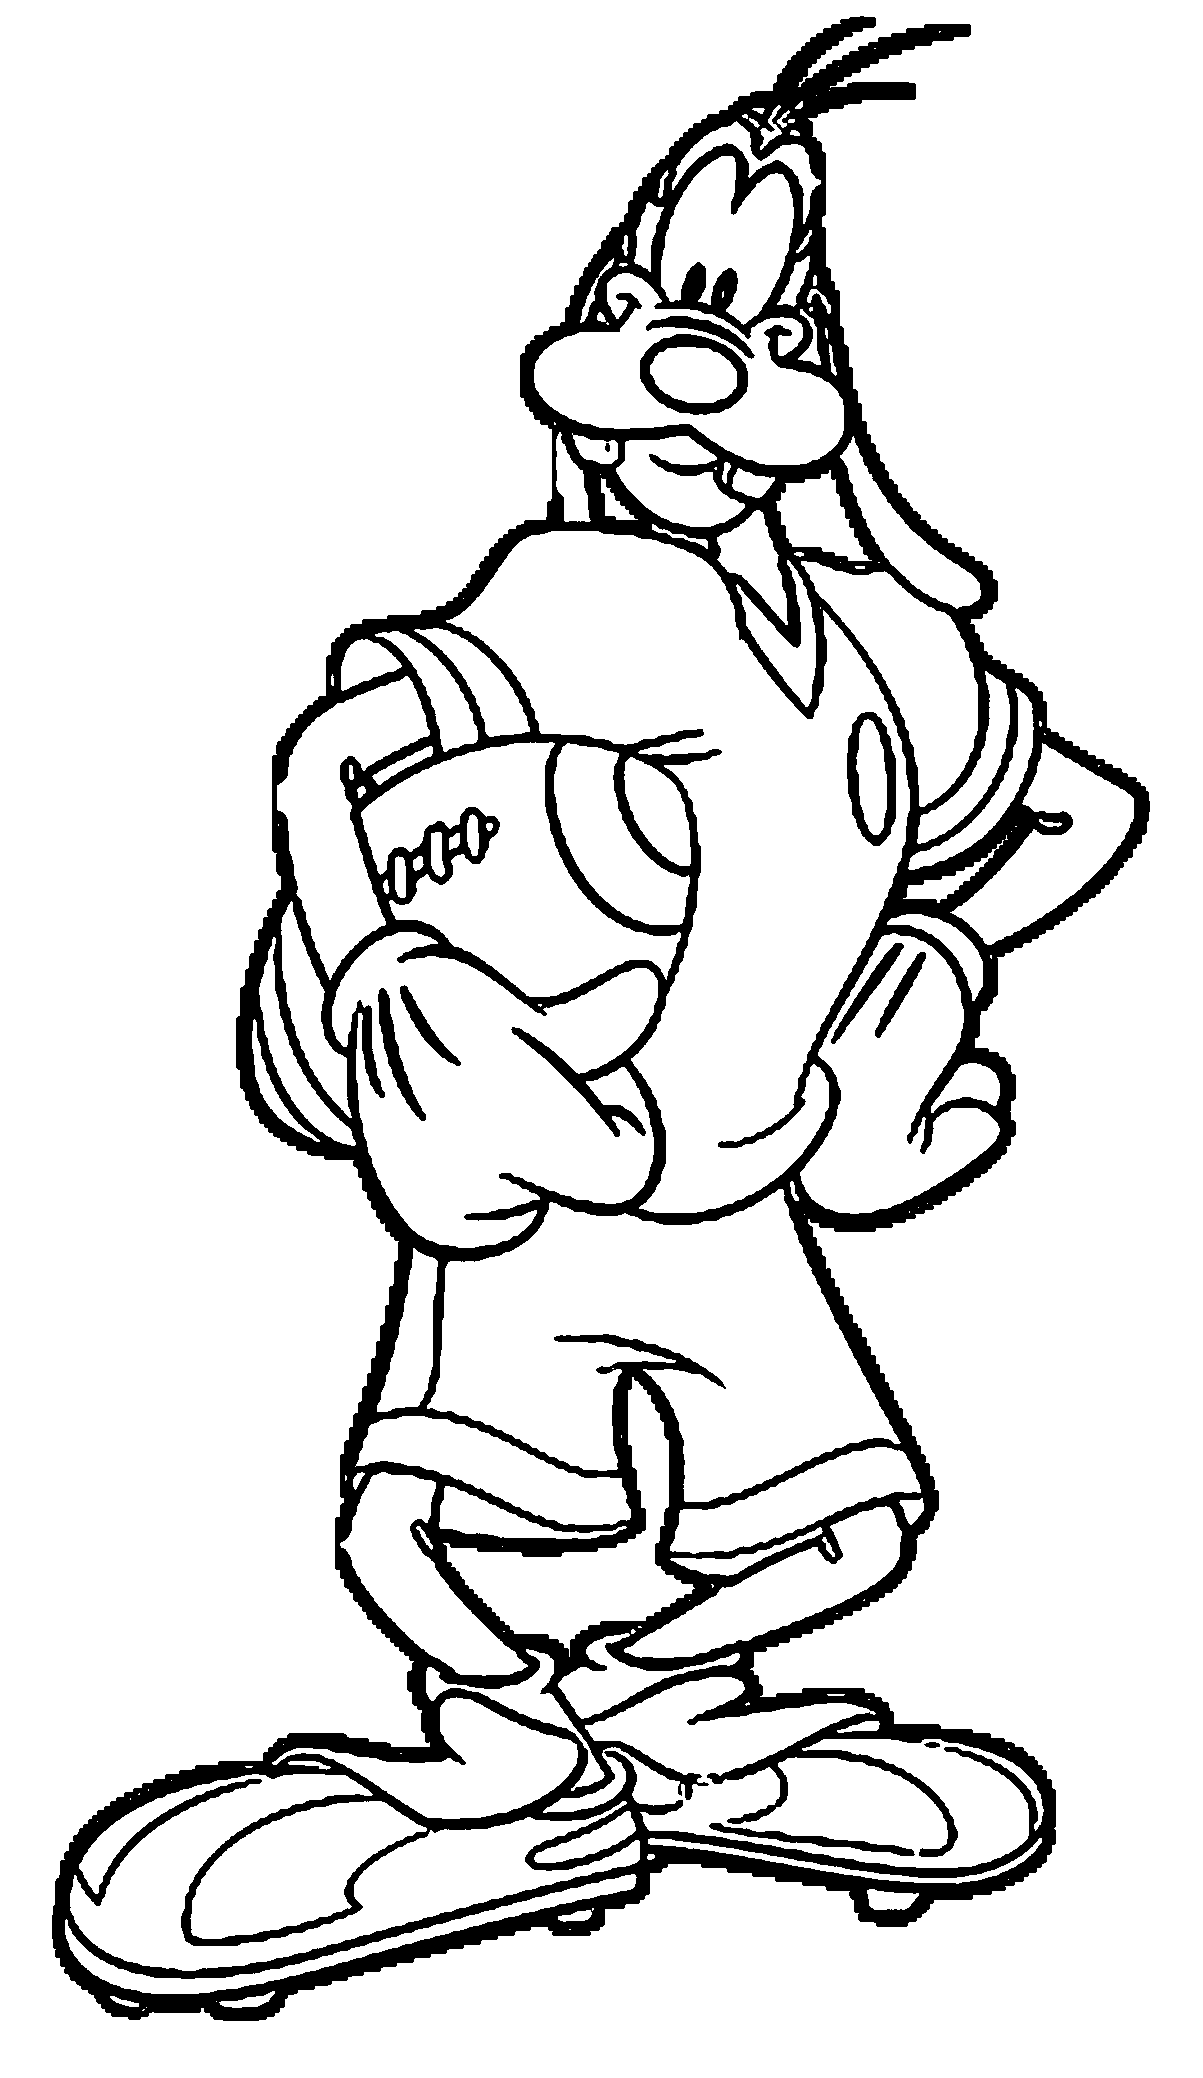 Goofy Football Player Coloring Page